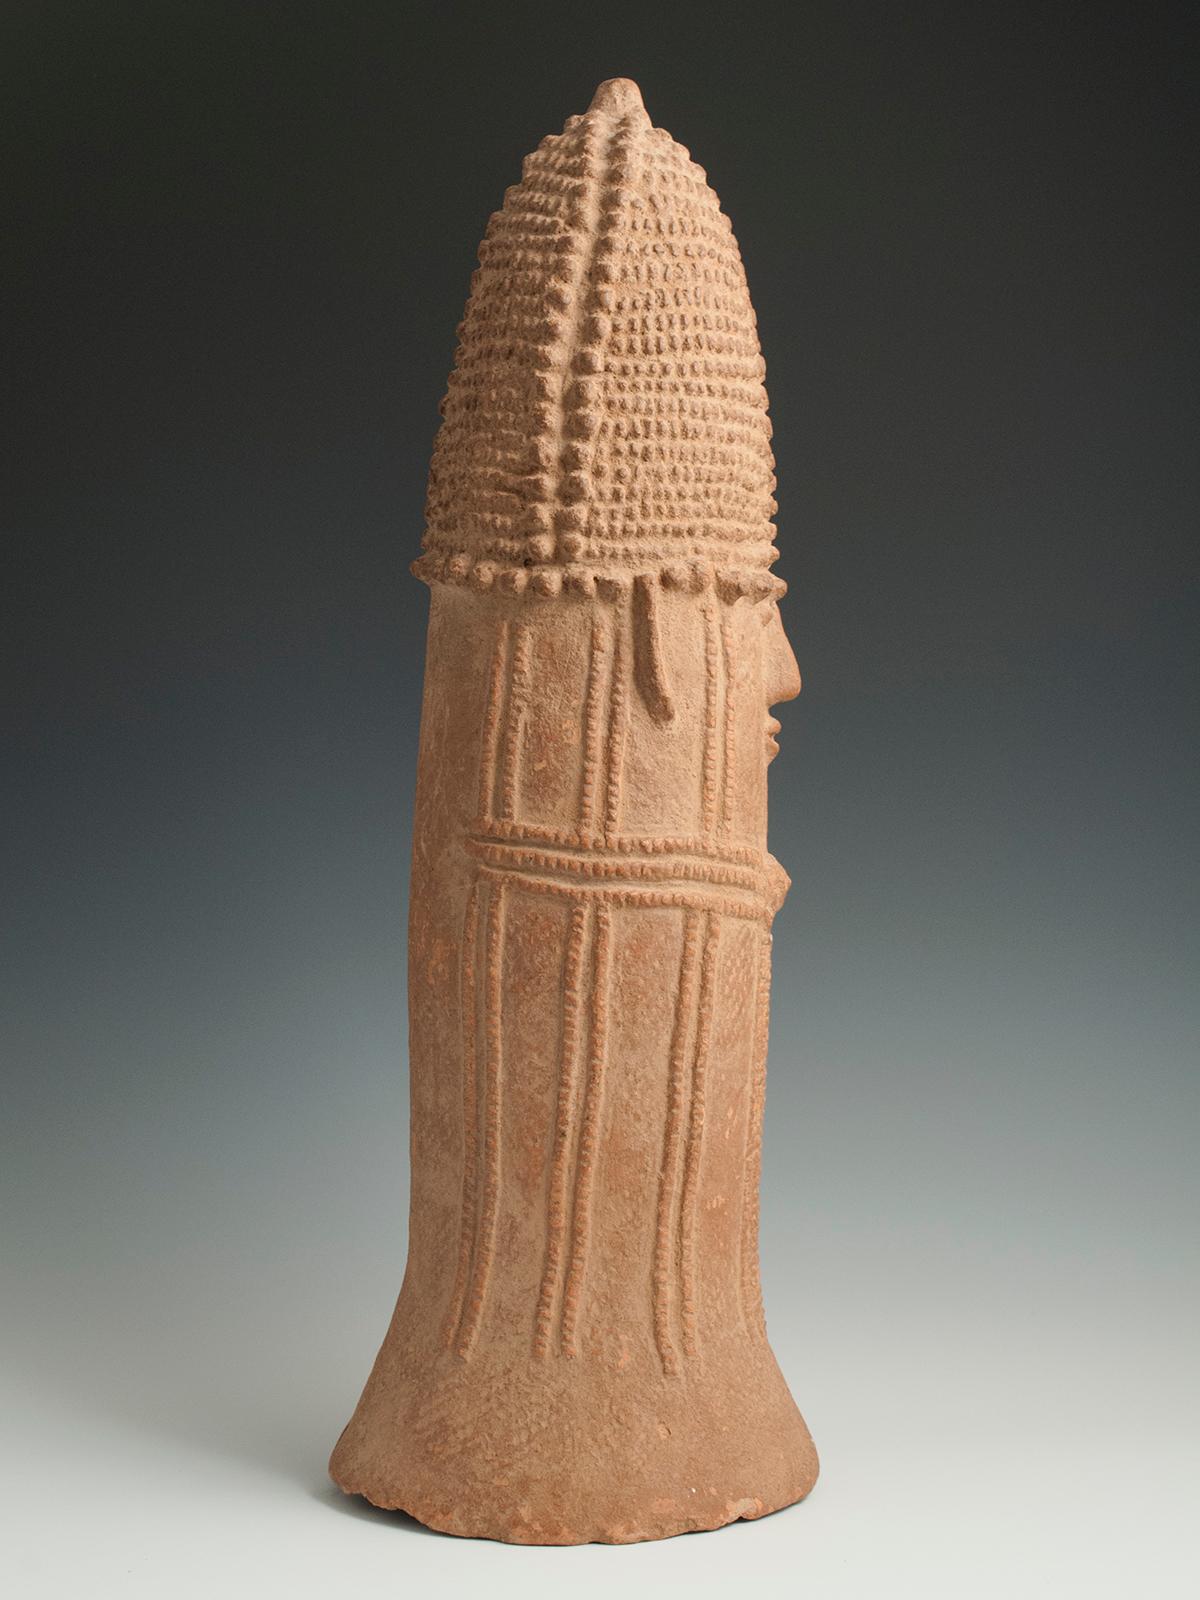 Terracotta storage Urn, Bura culture, Niger River Valley, Niger/Mali/Burkina Faso.

These urns were found during excavations in the Niger River Valley and are attributed to the mysterious Bura culture, about which little is known. The vessels were